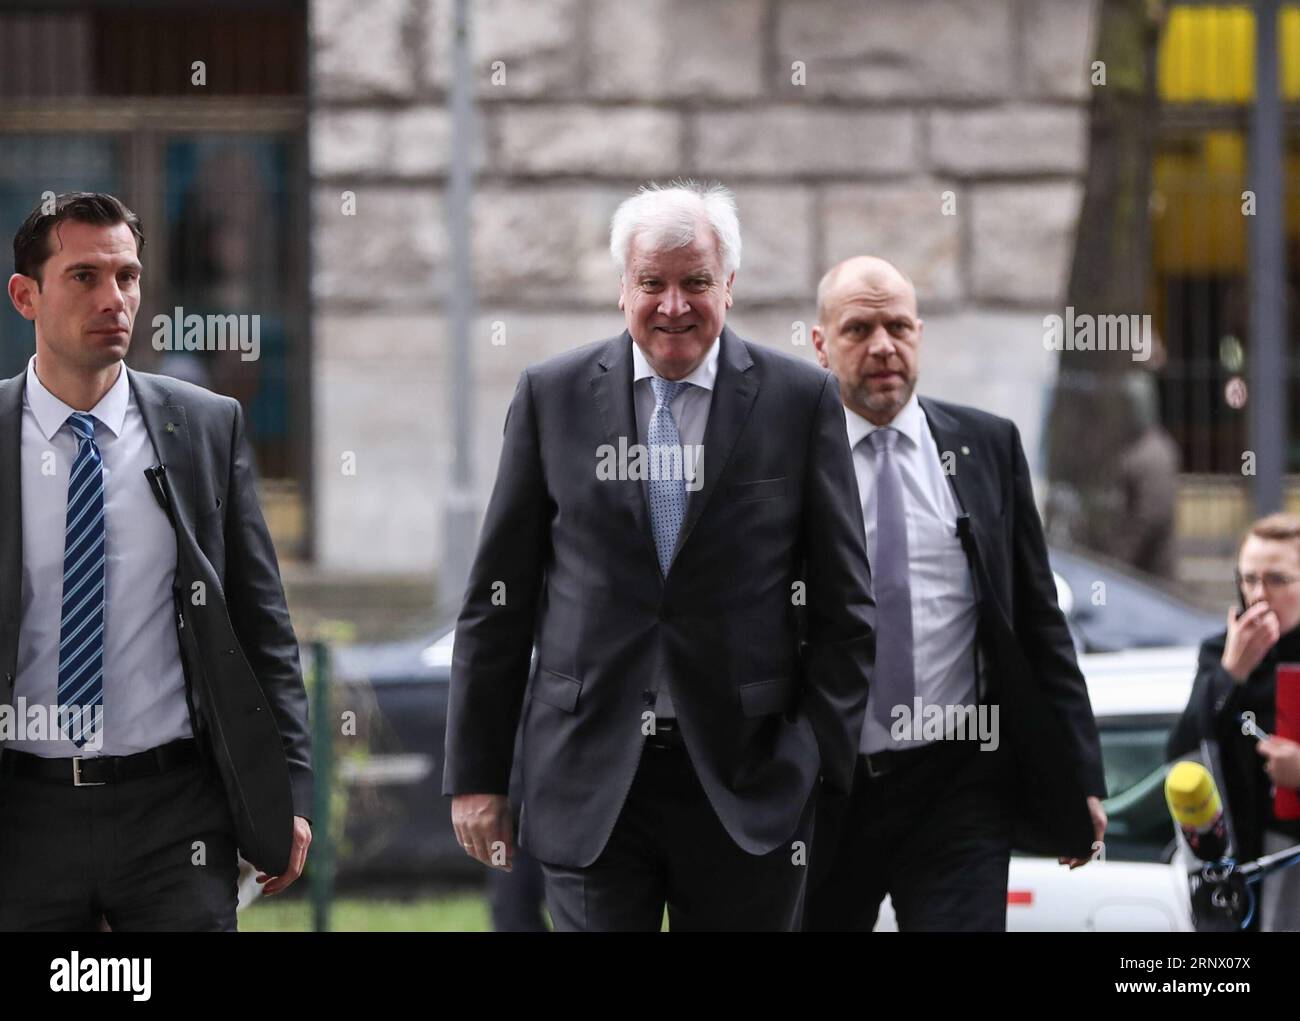 (180107) -- BERLIN, Jan. 7, 2018 -- Leader of German Christian Social Union (CSU) Horst Seehofer (C) arrives for the exploratory talks for a new coalition government between the Christian Democratic Union (CDU), the CSU and the Social Democratic Party (SPD) at the headquarters of SPD in Berlin, capital of Germany, on Jan. 7, 2018.) (zxj) GERMANY-BERLIN-COALITION GOVERNMENT-EXPLORATARY TALKS ShanxYuqi PUBLICATIONxNOTxINxCHN Stock Photo